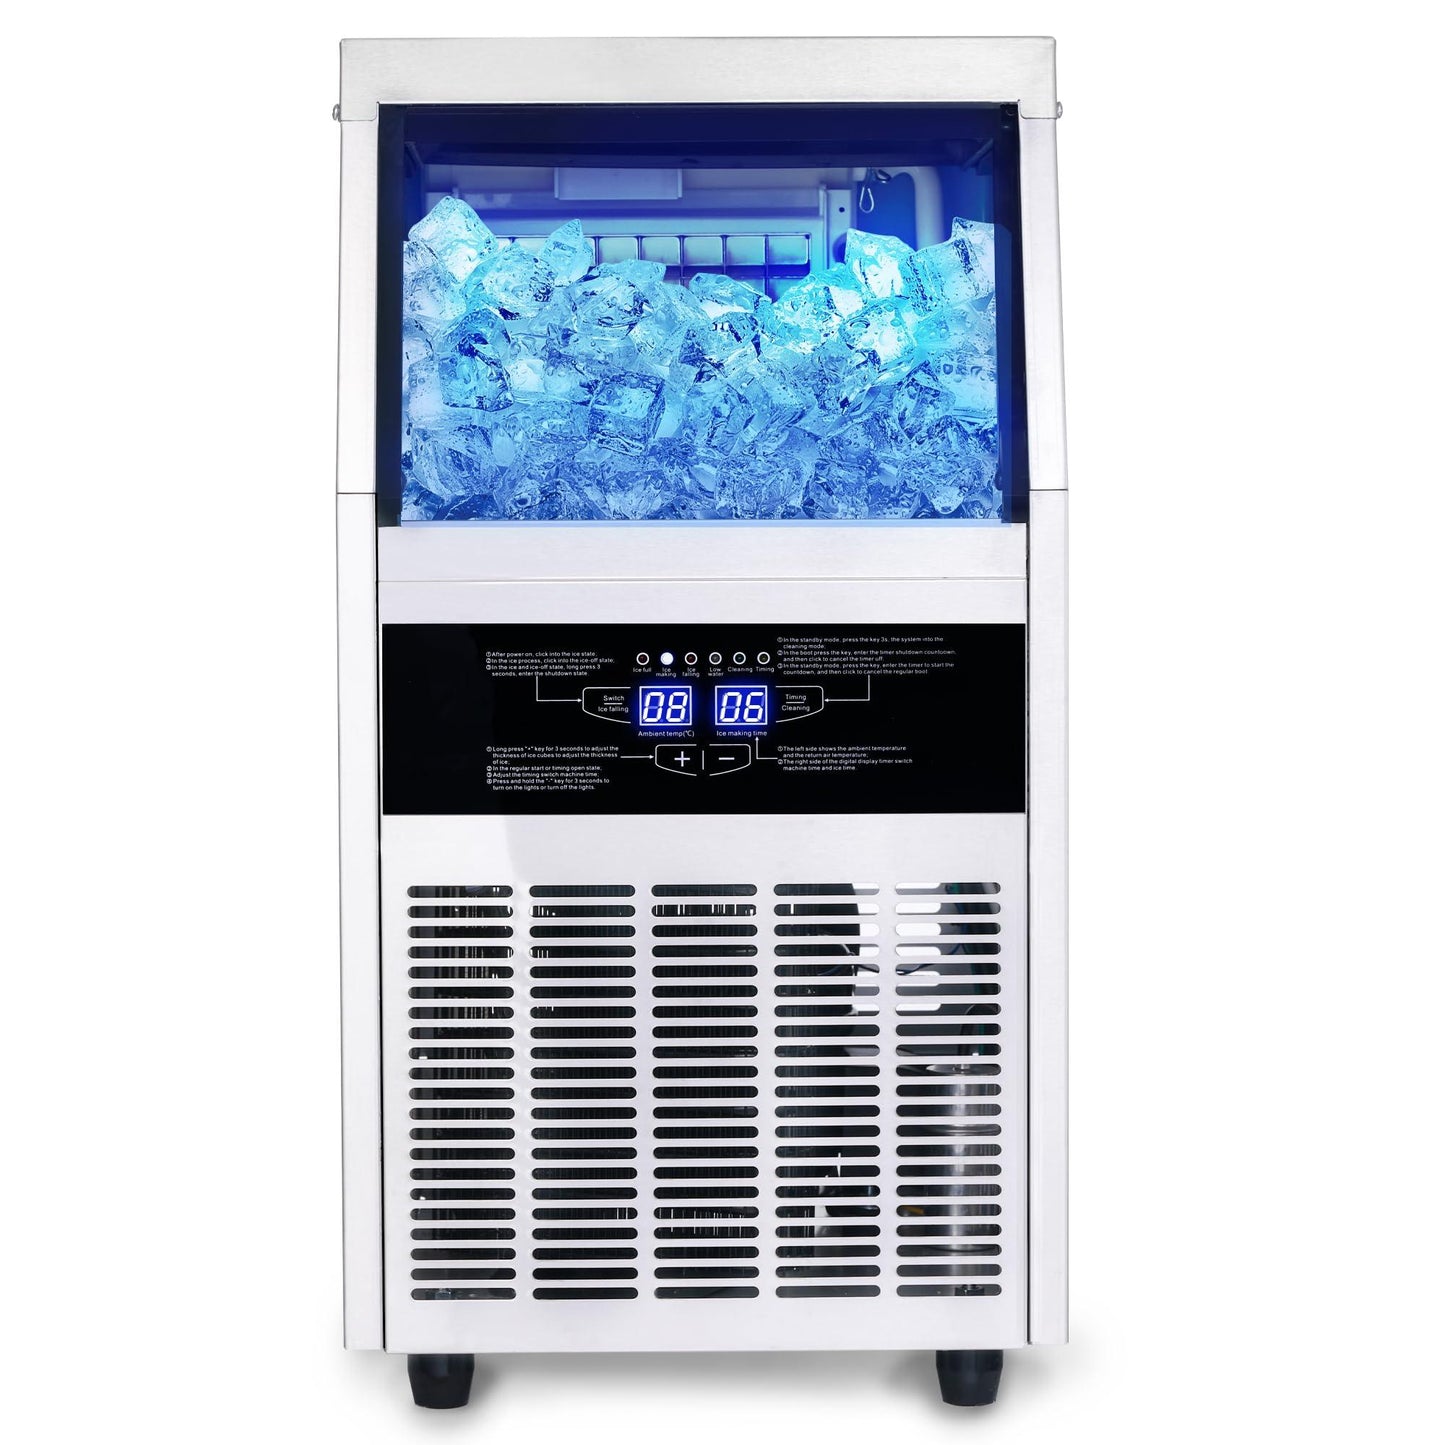 Zomagas Commercial Ice Maker Machine, 80-90LBS/24H Under Counter Ice Maker, Stainless Steel Freestanding Ice Machine with 28LBS Bin, Self-Cleaning, Scoop, Ideal for Home Bar Offices - CookCave